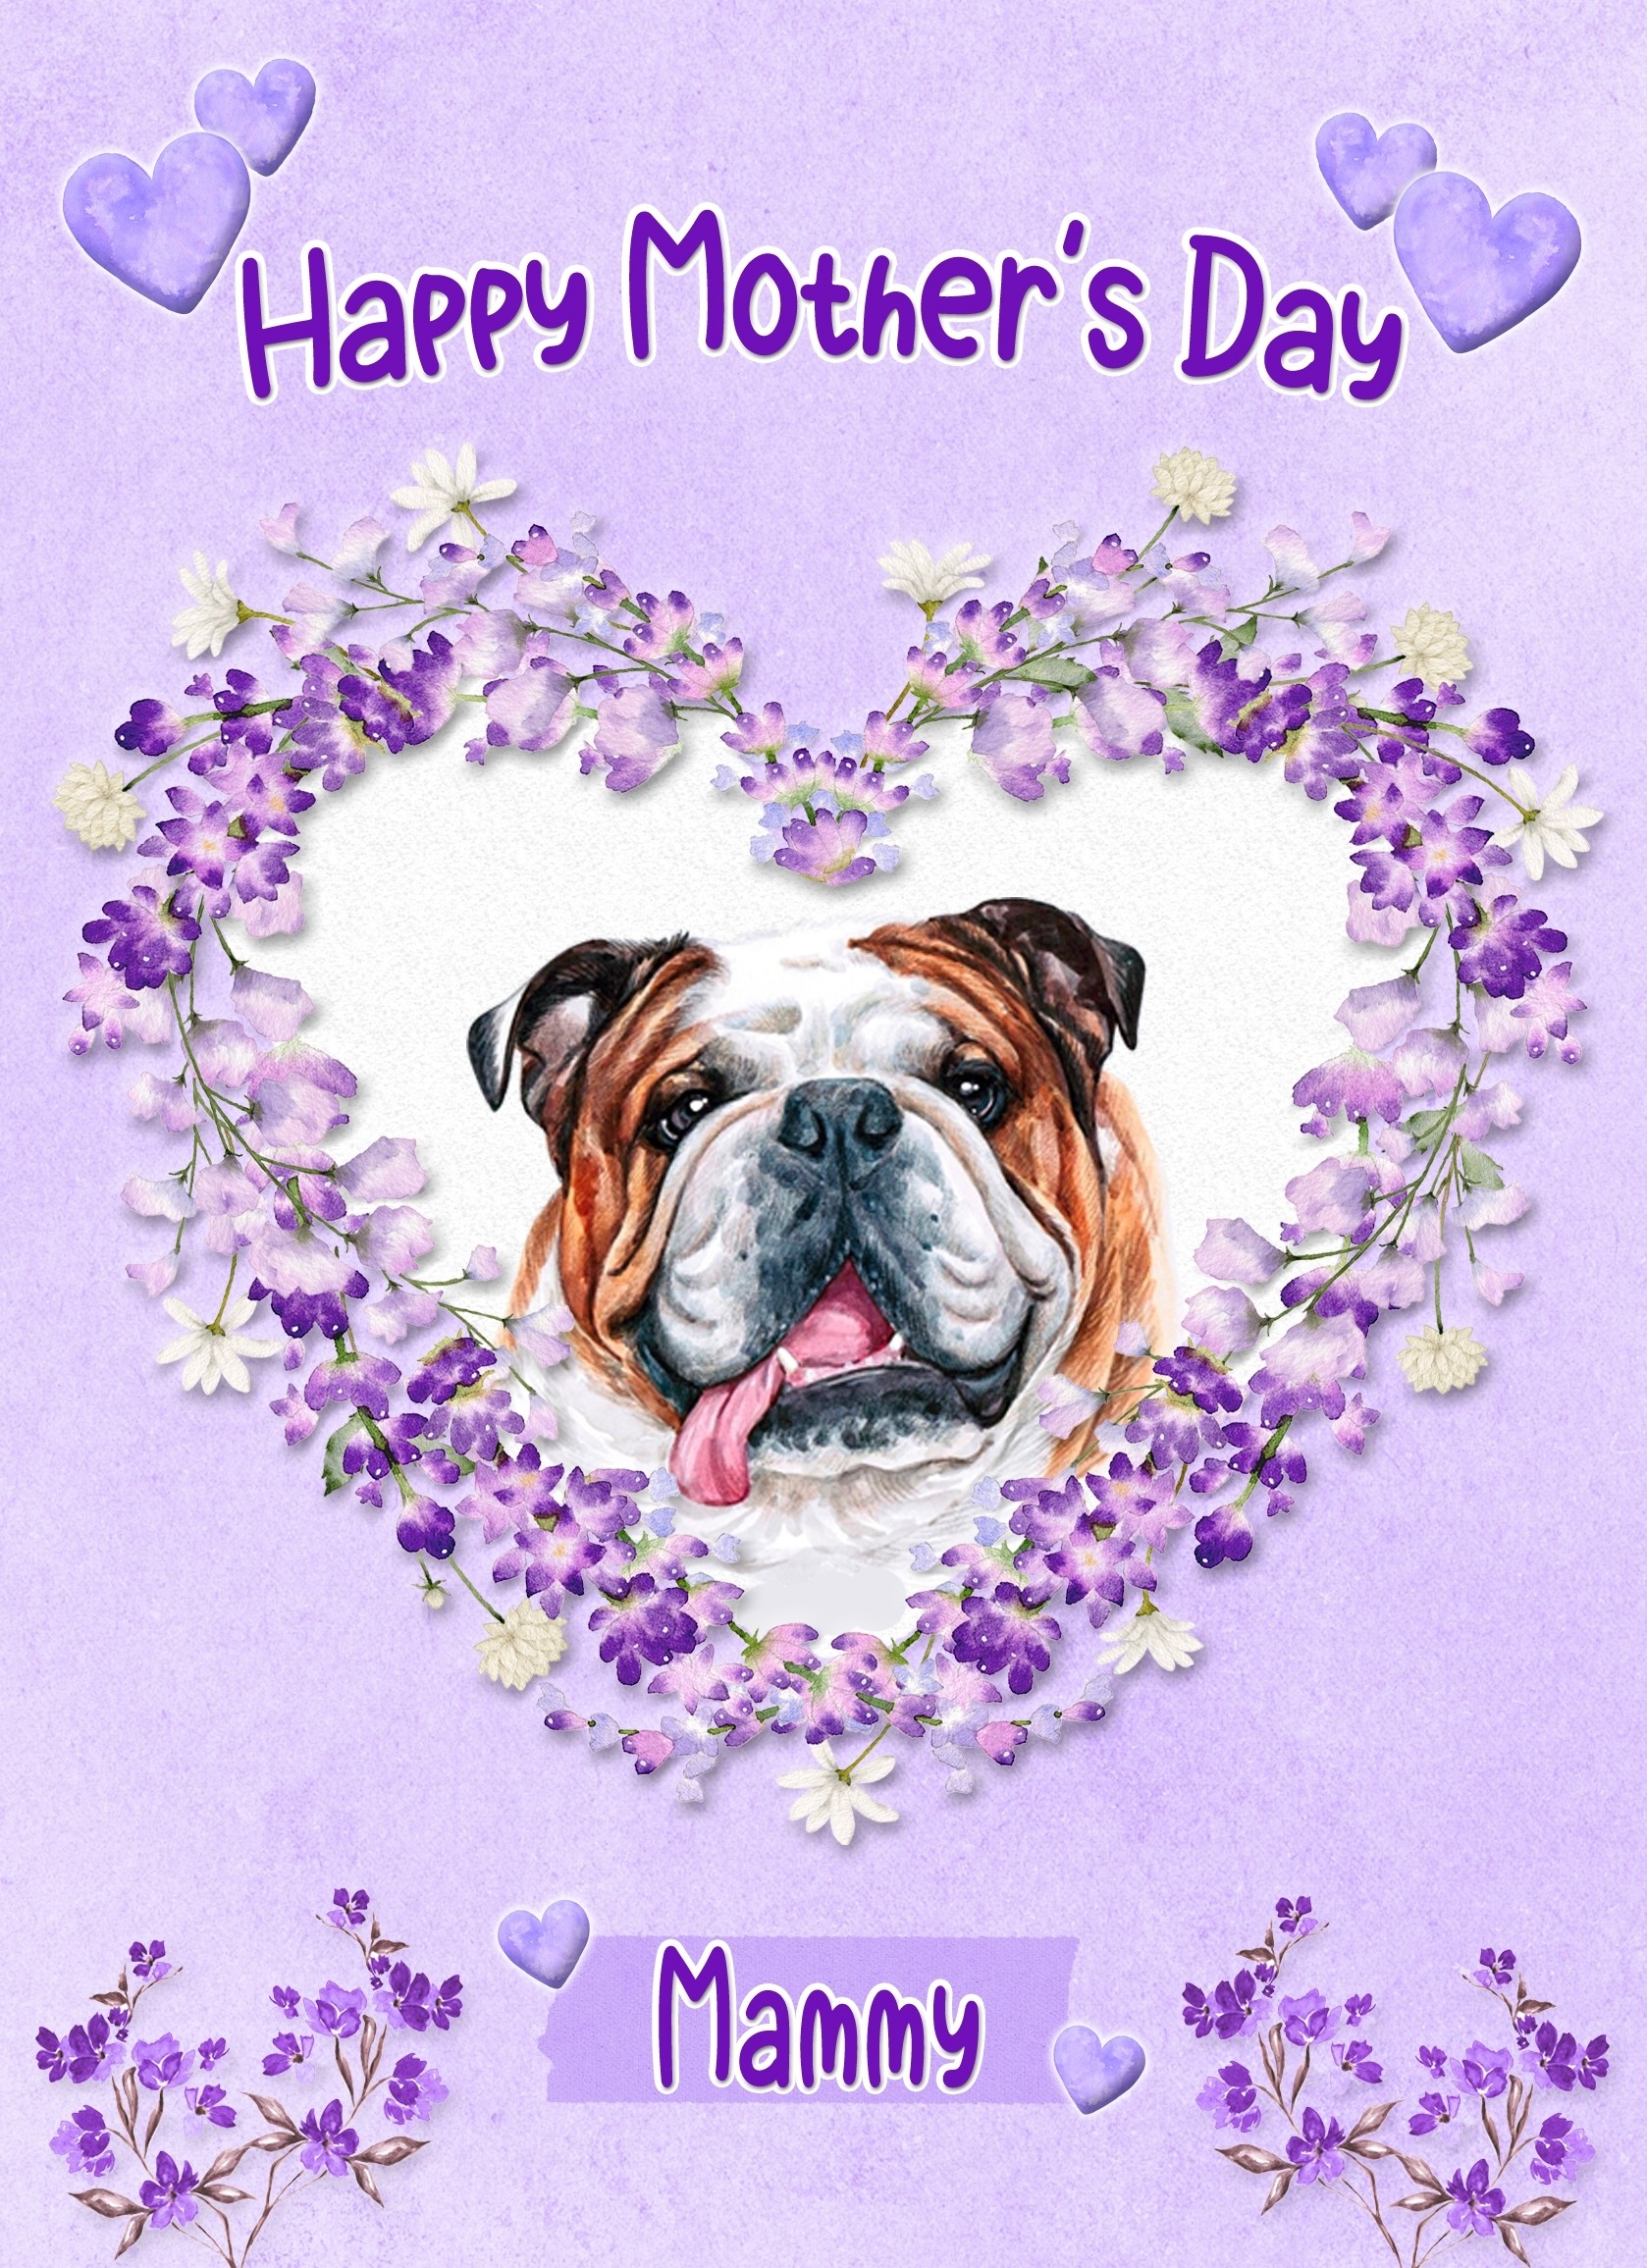 Bulldog Dog Mothers Day Card (Happy Mothers, Mammy)